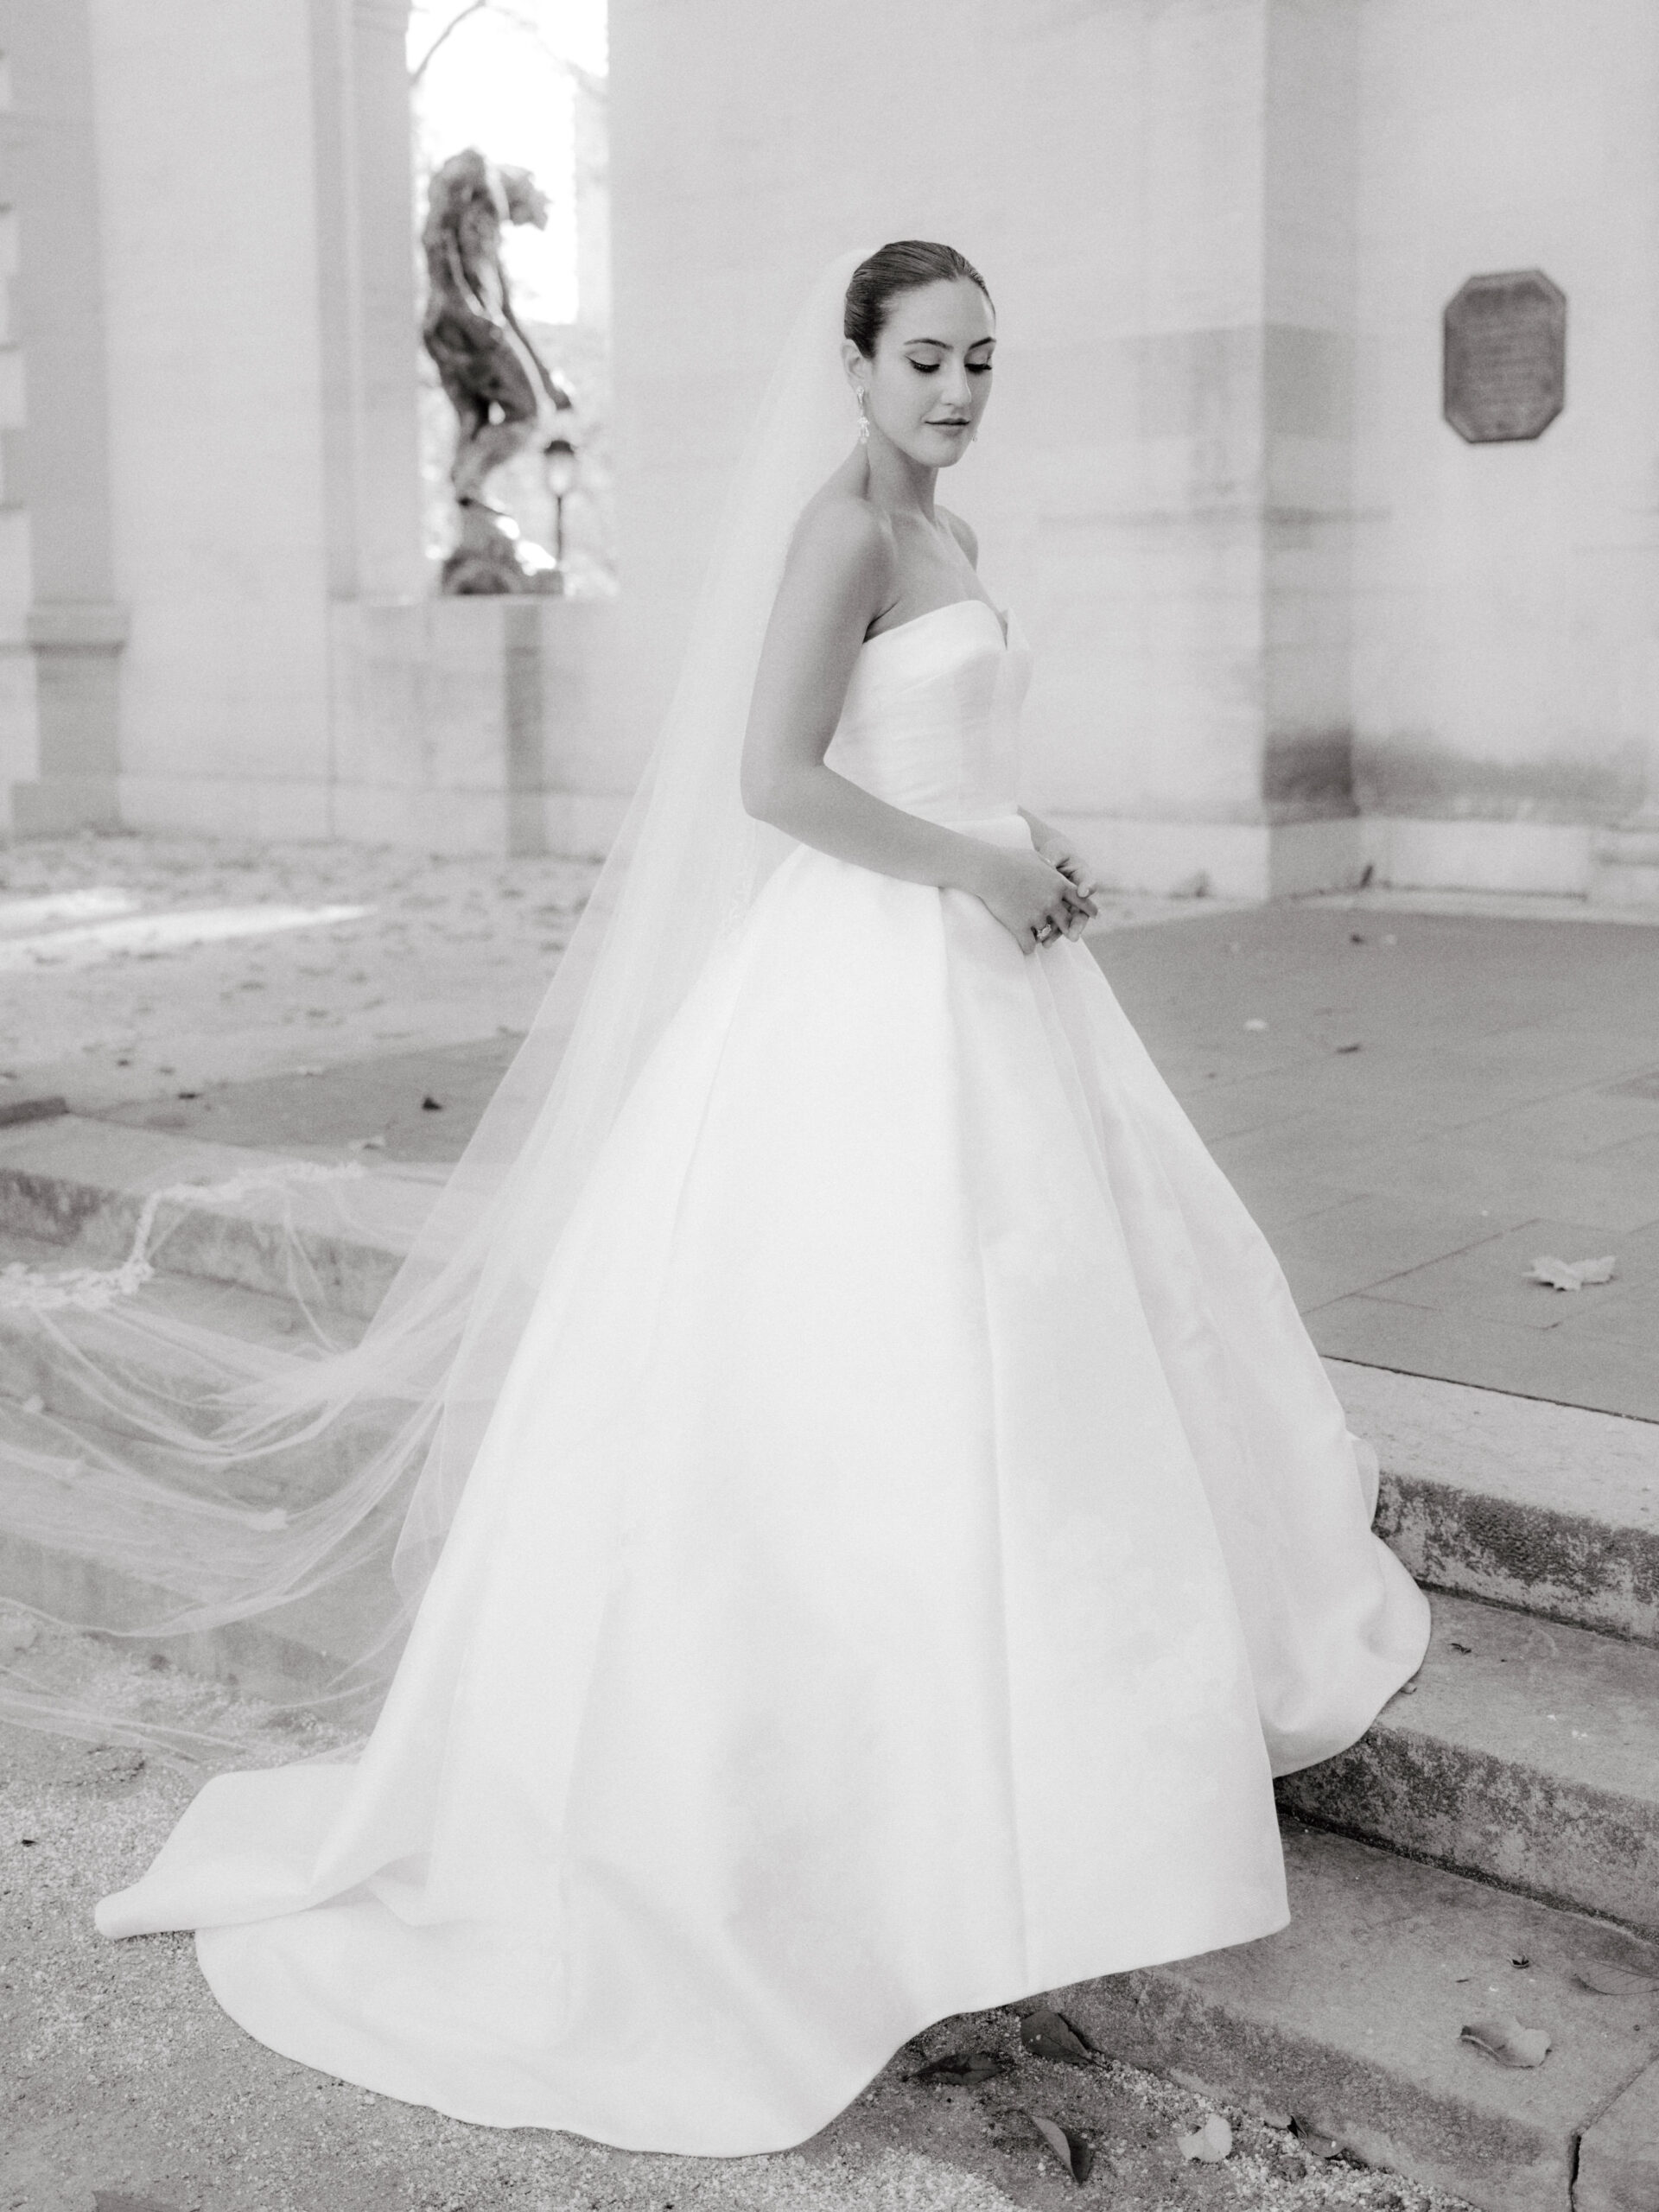 A beautiful bridal portrait with fine architecture in the background by Jenny Fu Studio.